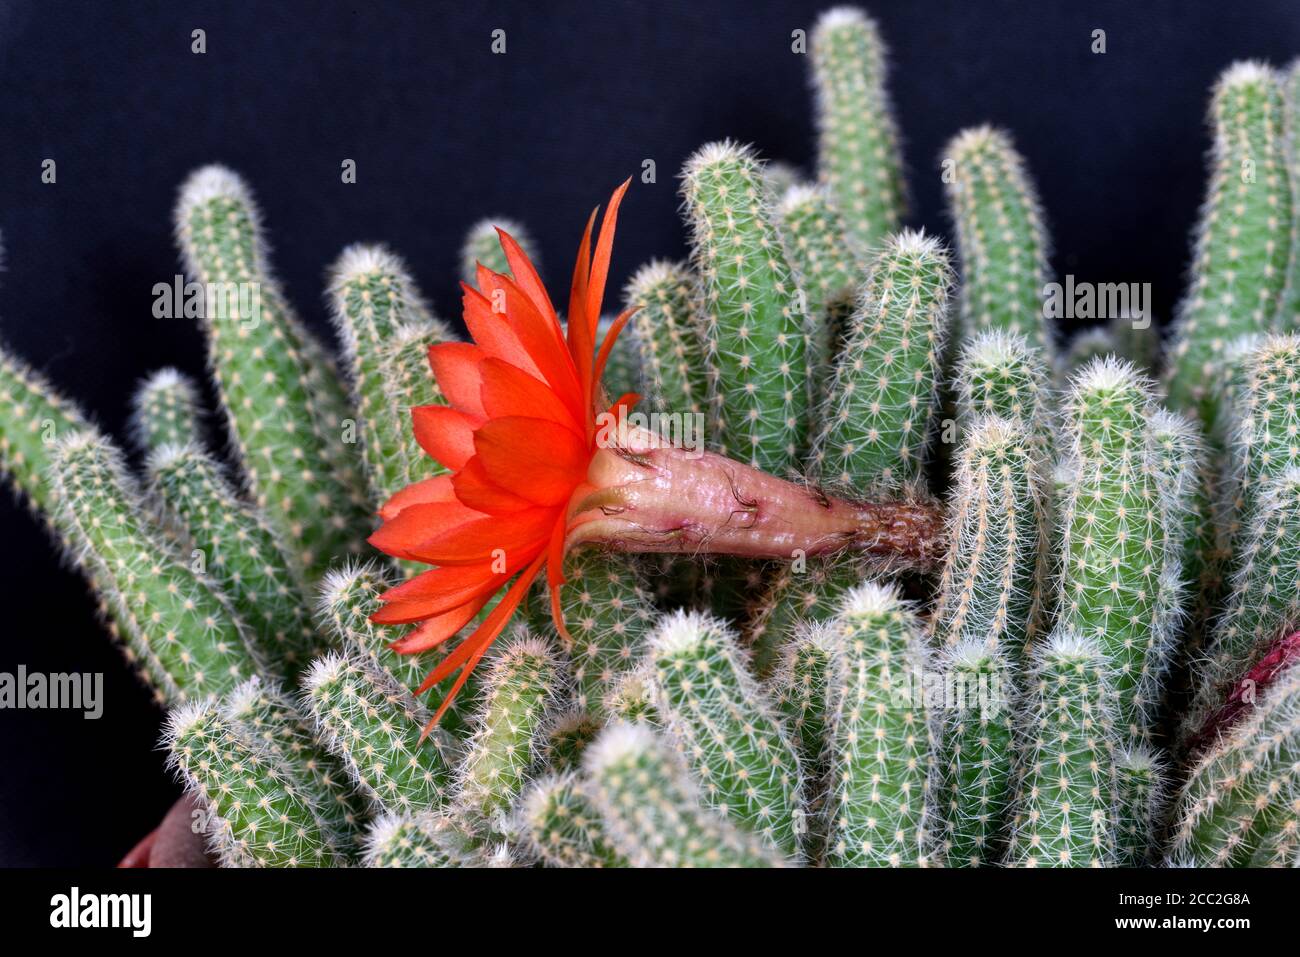 The almost fully opened flower of the Ladyfinger Cactus (Mammillaria sp)  in Southern England Stock Photo